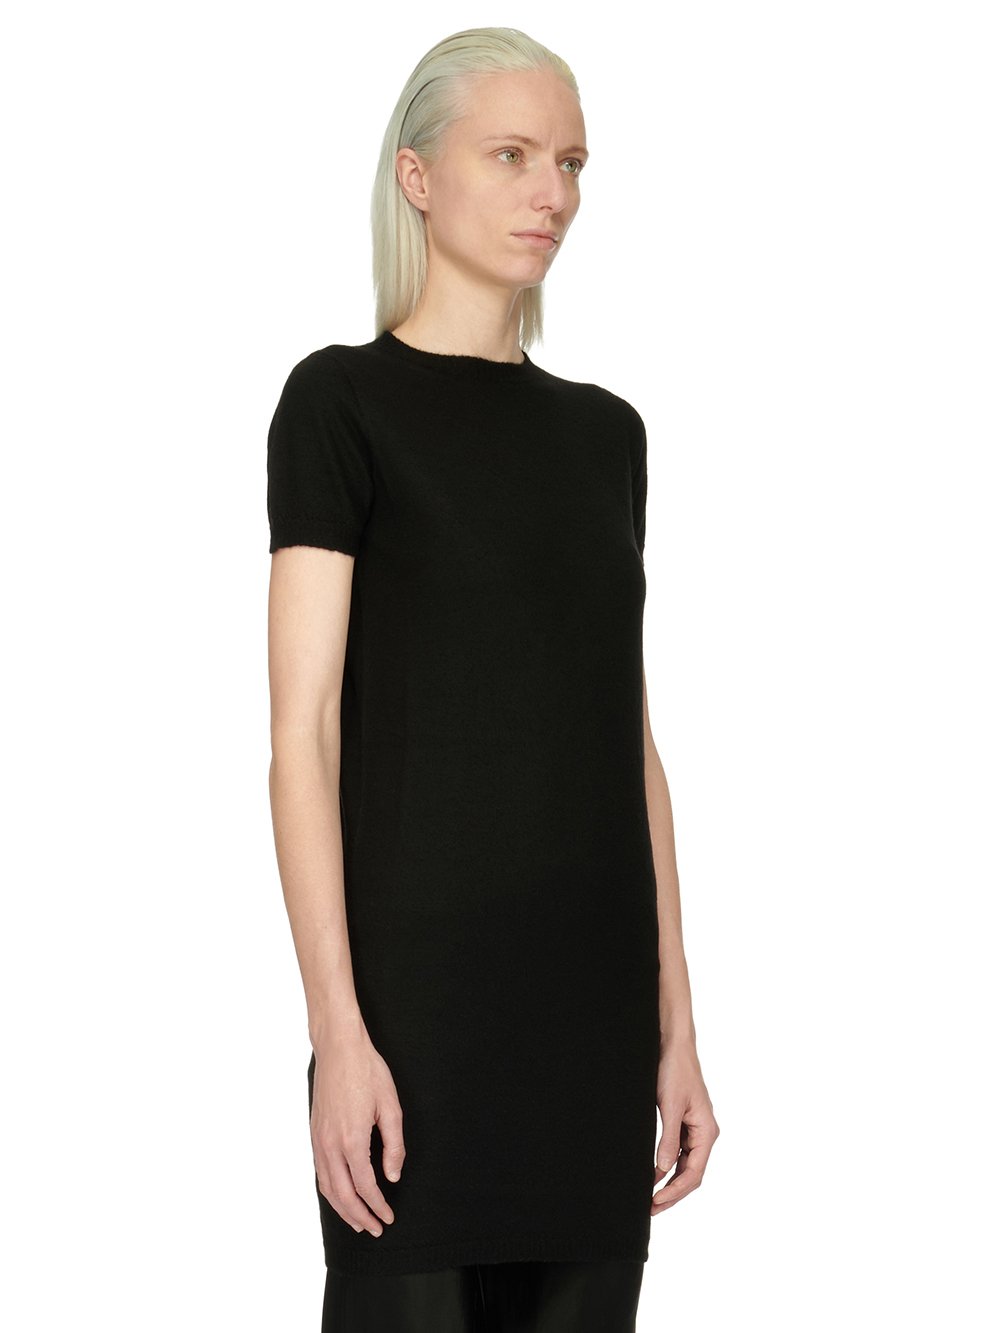 RICK OWENS FOREVER SS TUNIC IN BLACK BOILED CASHMERE. 